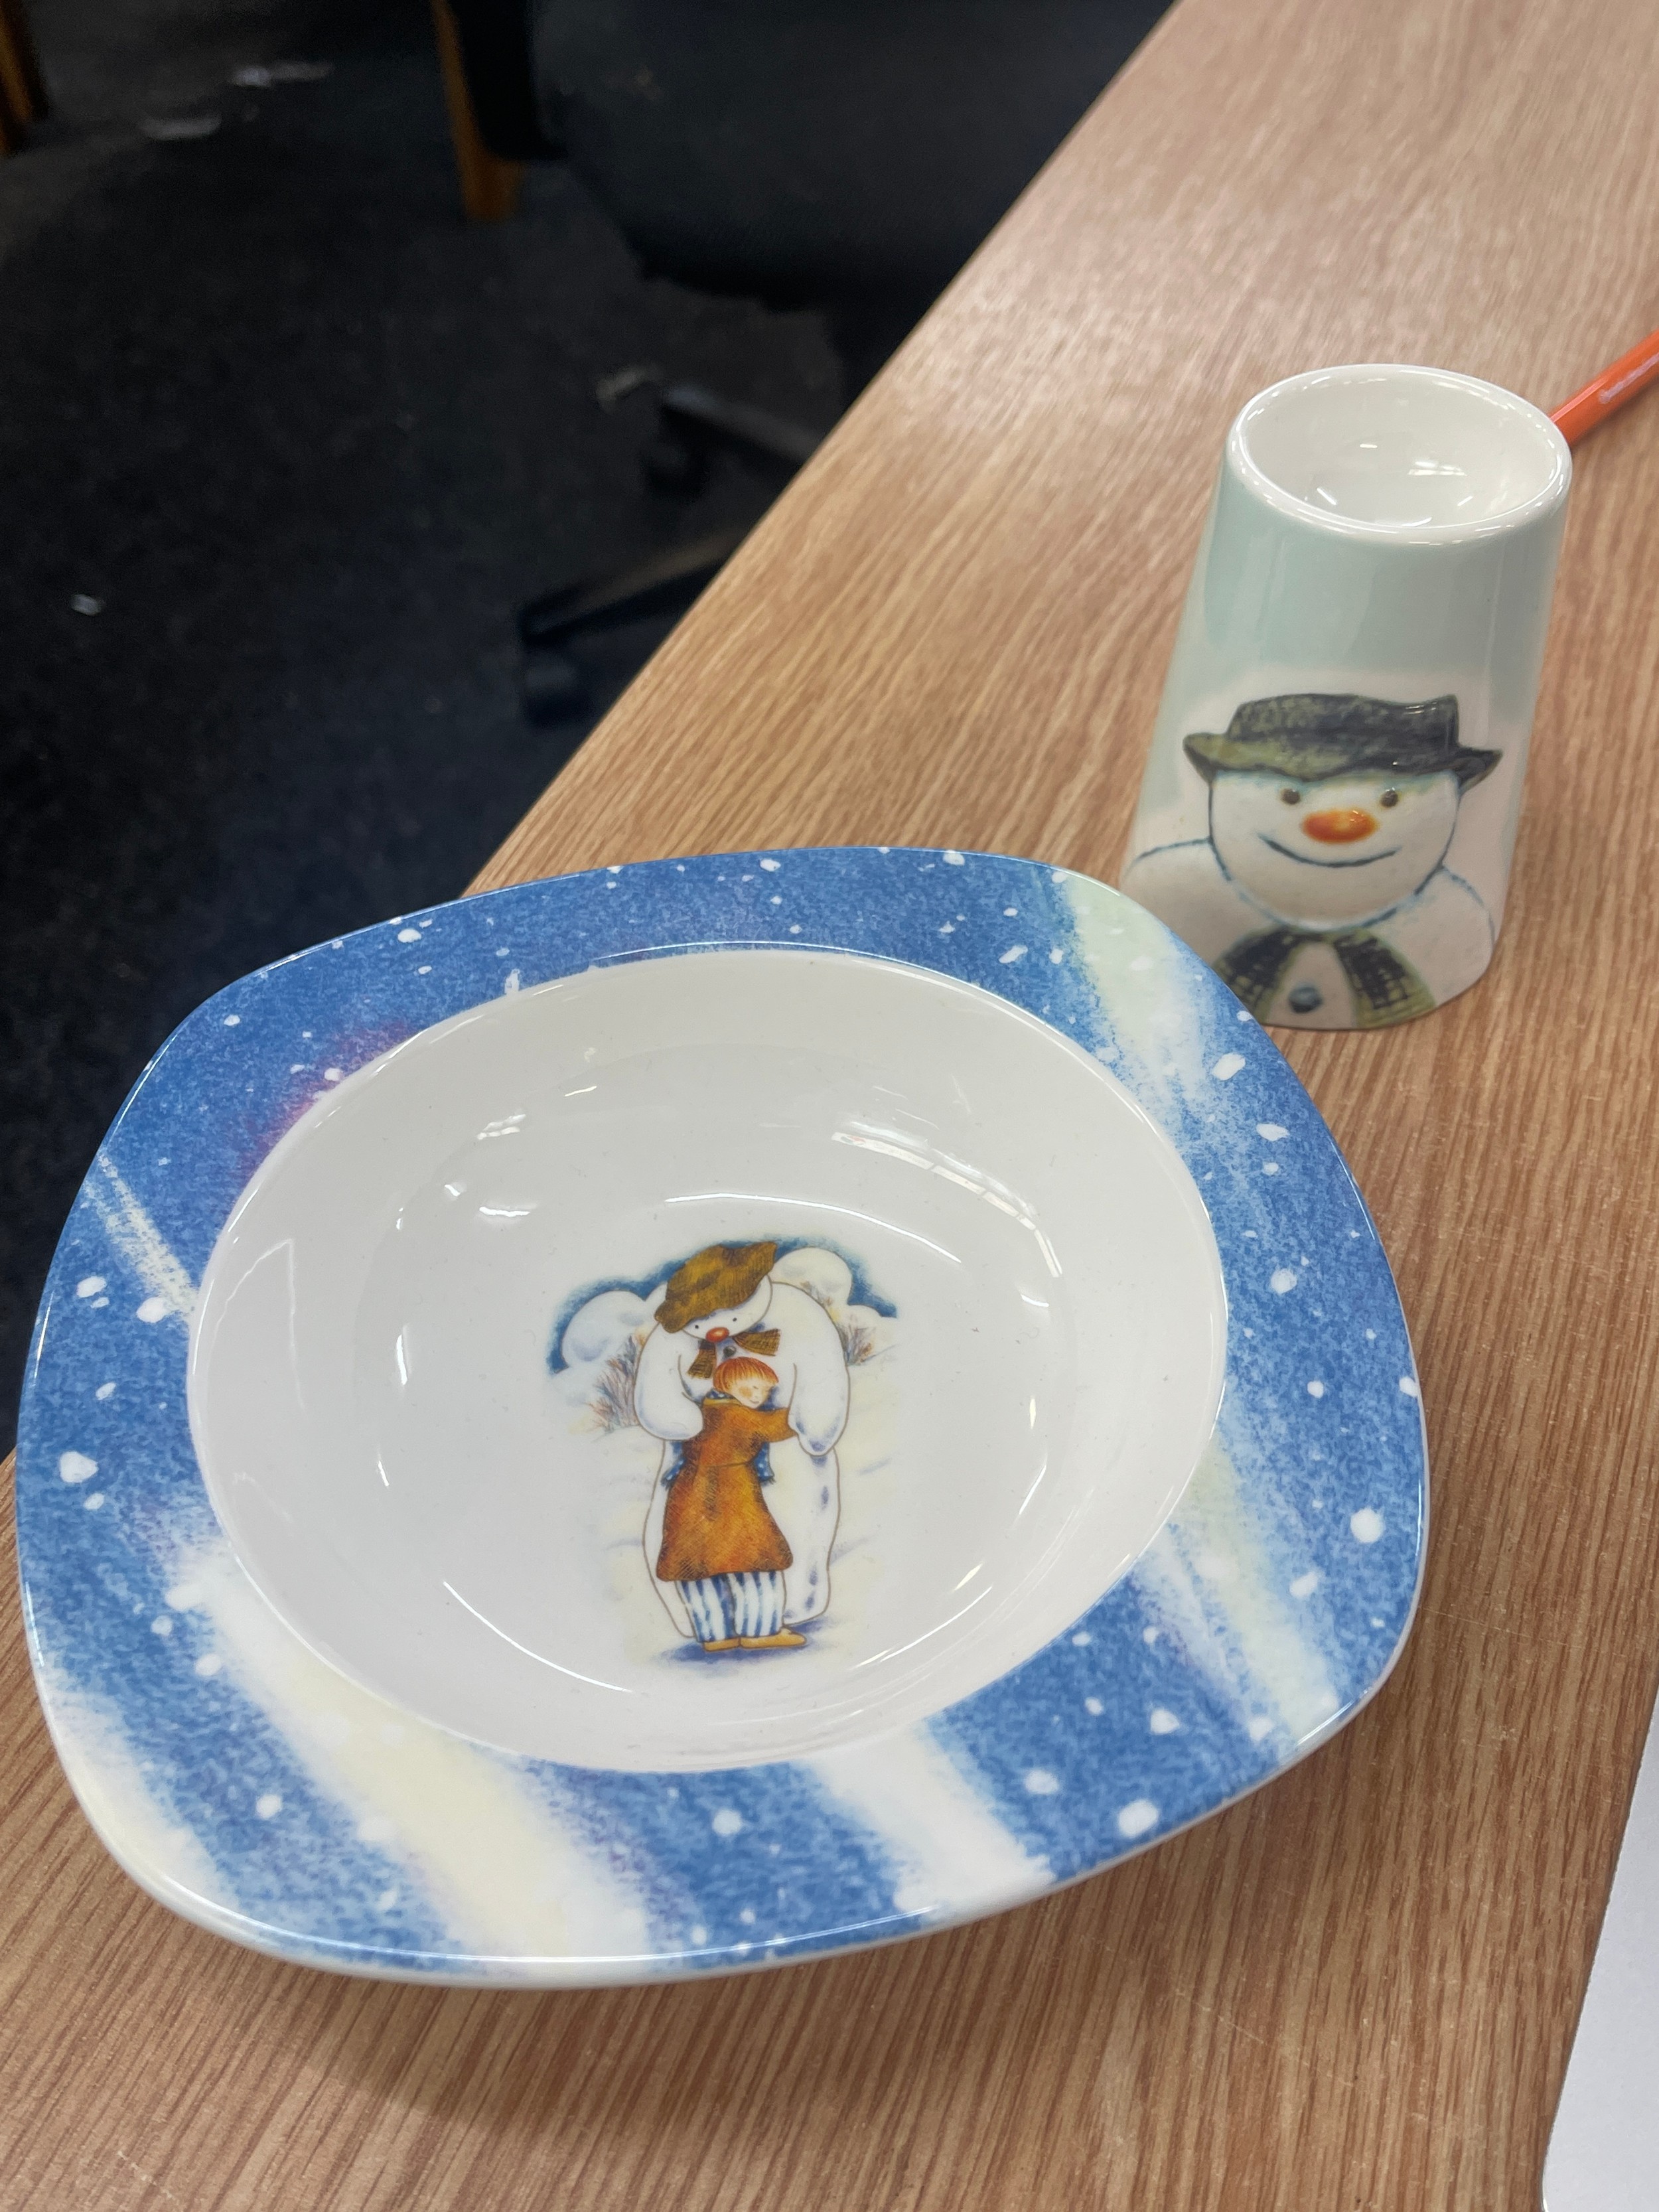 The Snow man pottery, bowl and egg cup